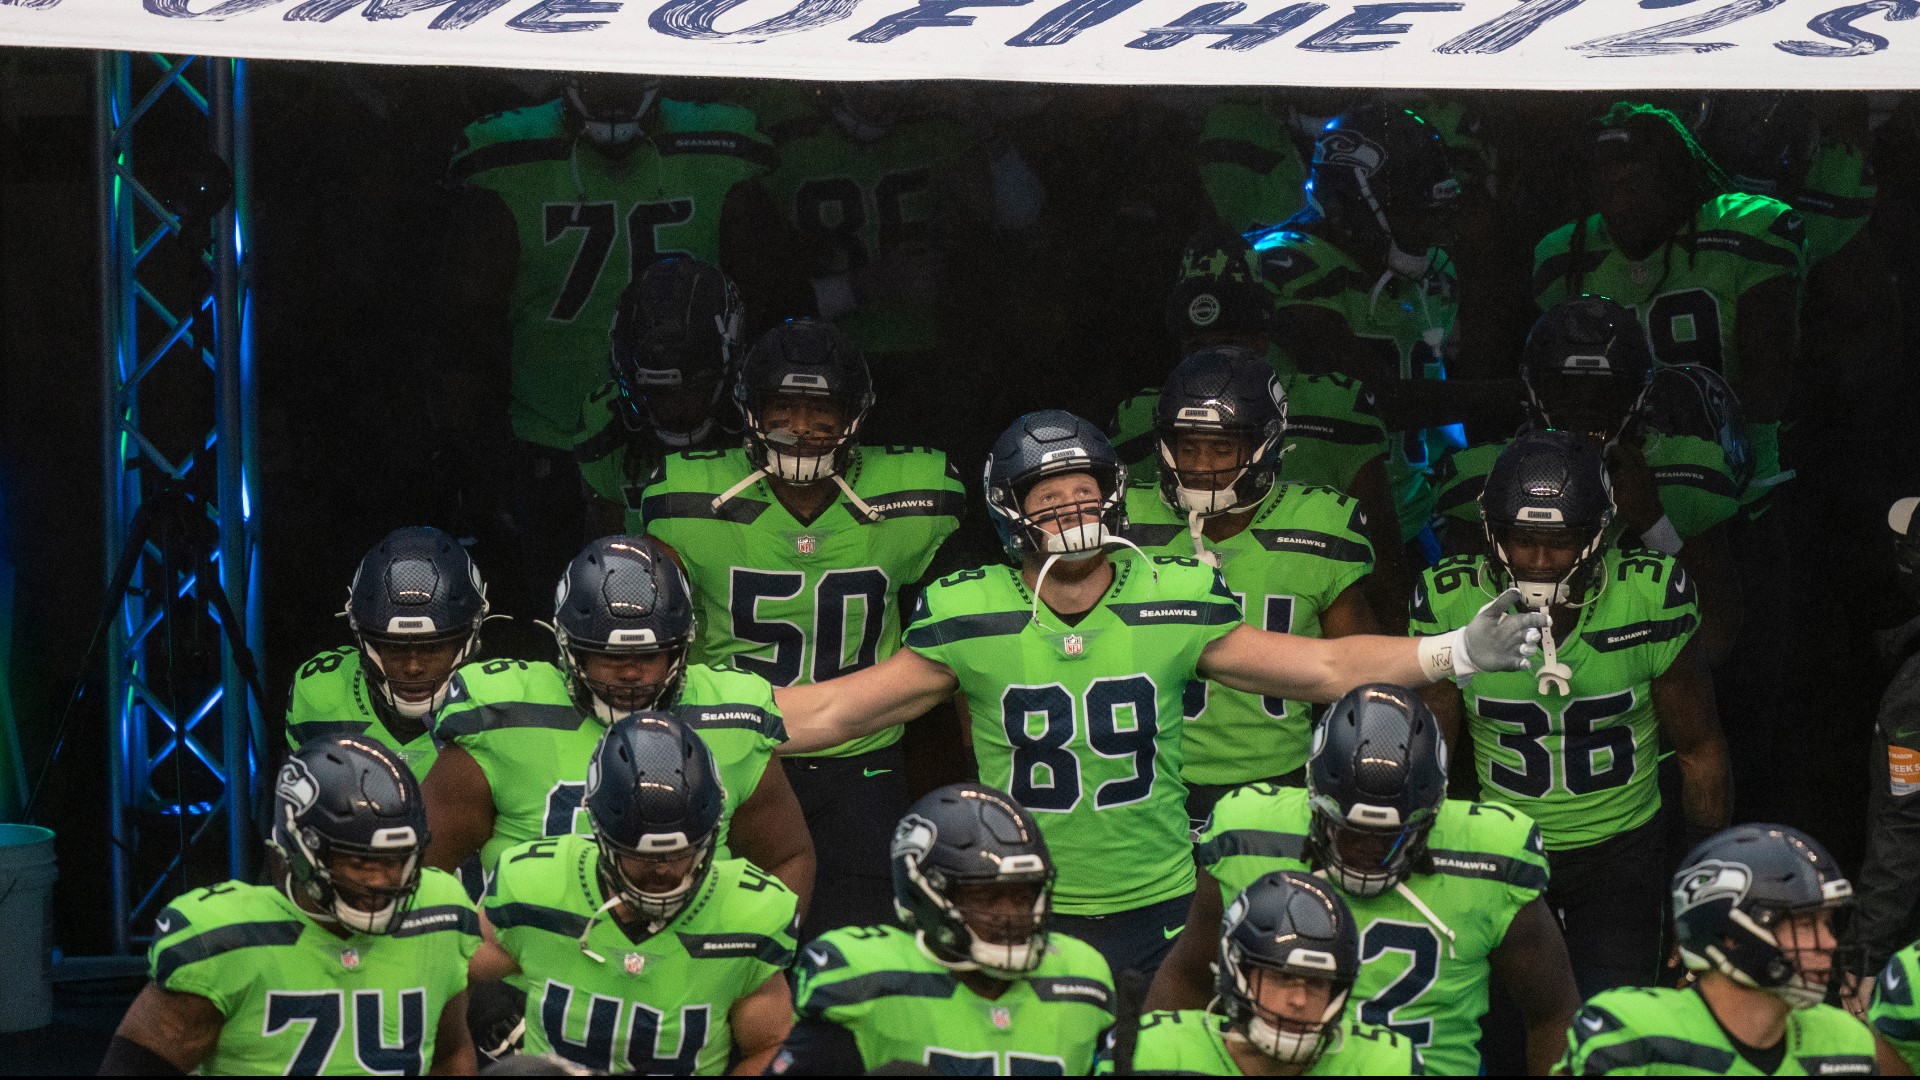 The Seahawks are 5-0 coming out of a bye week and getting ready to take on the 4-2 Arizona Cardinals. Terry Hollimon gives us the lowdown on this week's Hawk Zone.